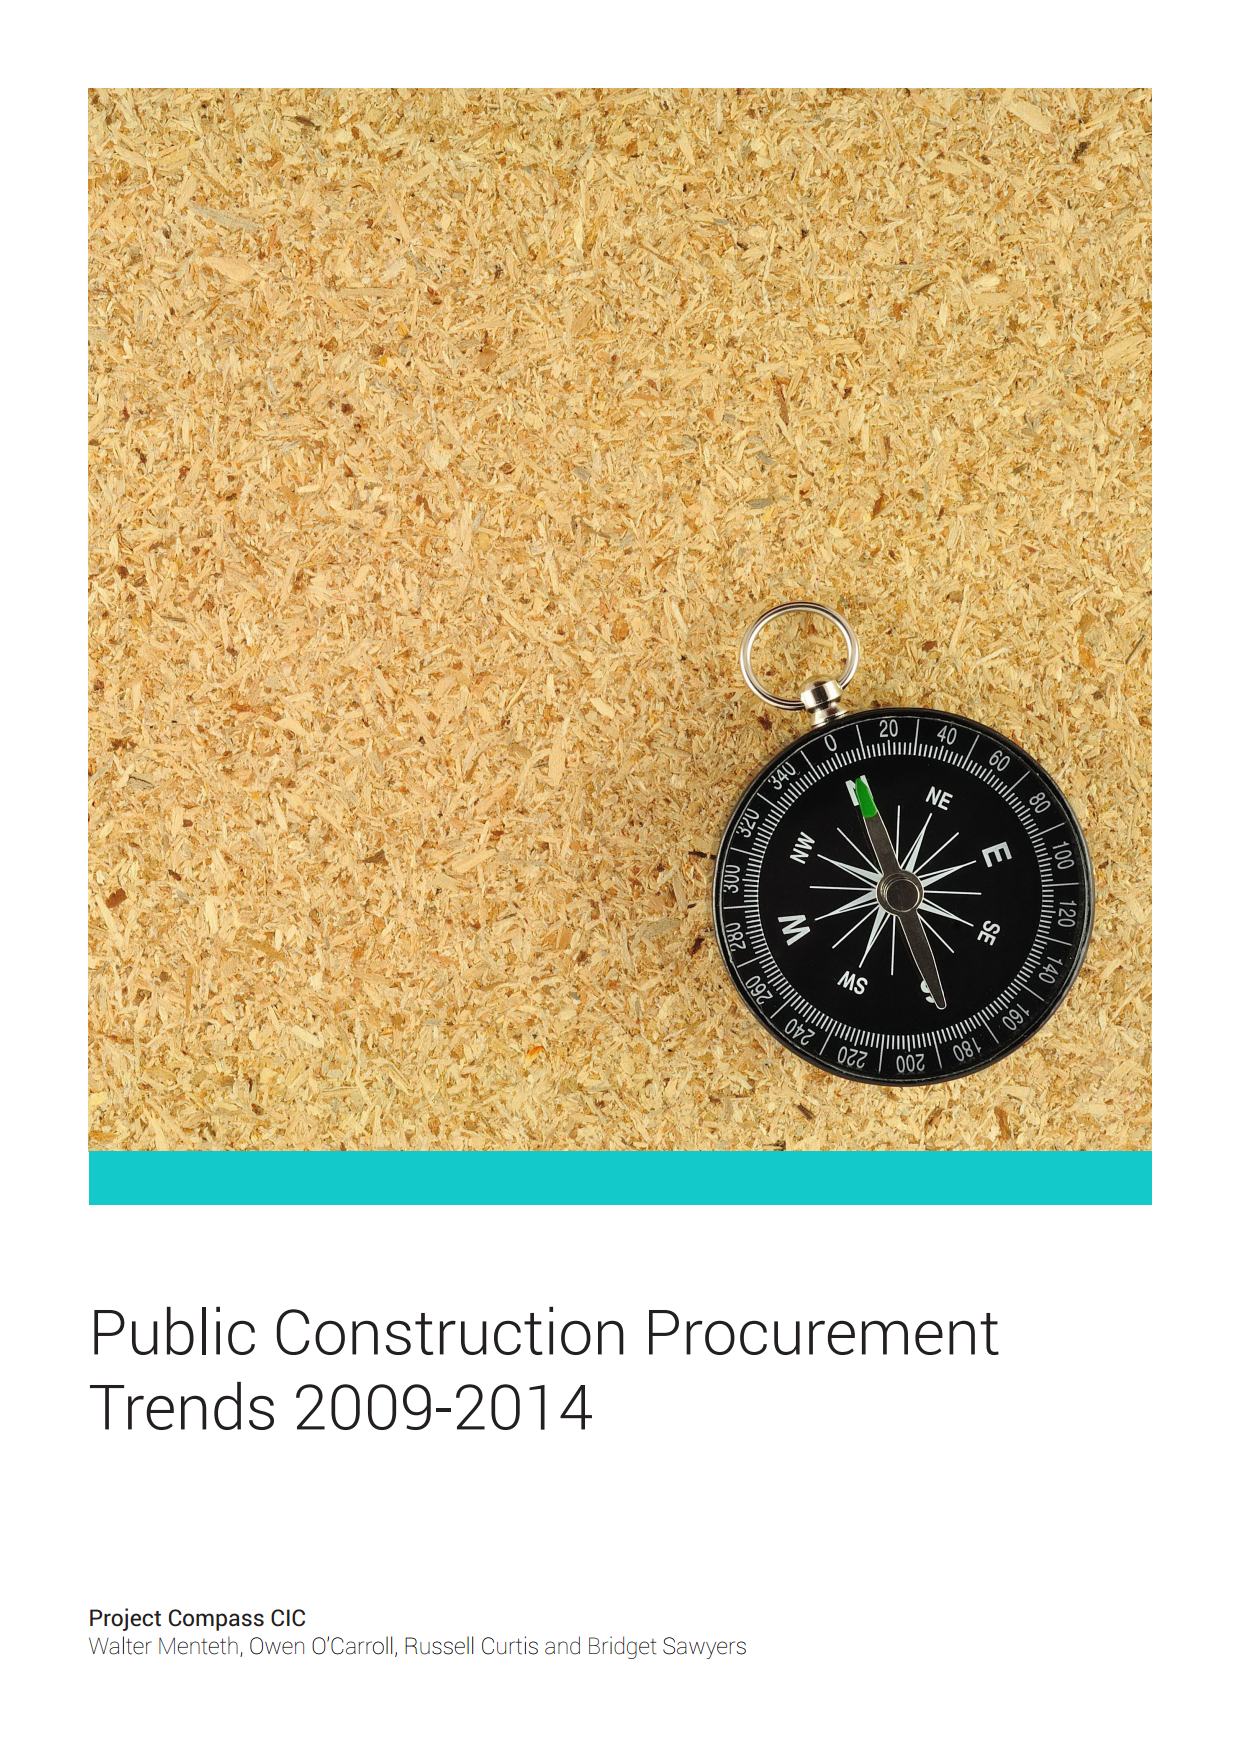 Public Construction Procurement Trends 2009–2014 / Walter Menteth, Owen O’Carroll, Russell Curtis and Bridget Sawyers ; Project Compass CIC. — Published by Project Compass CIC, 2014